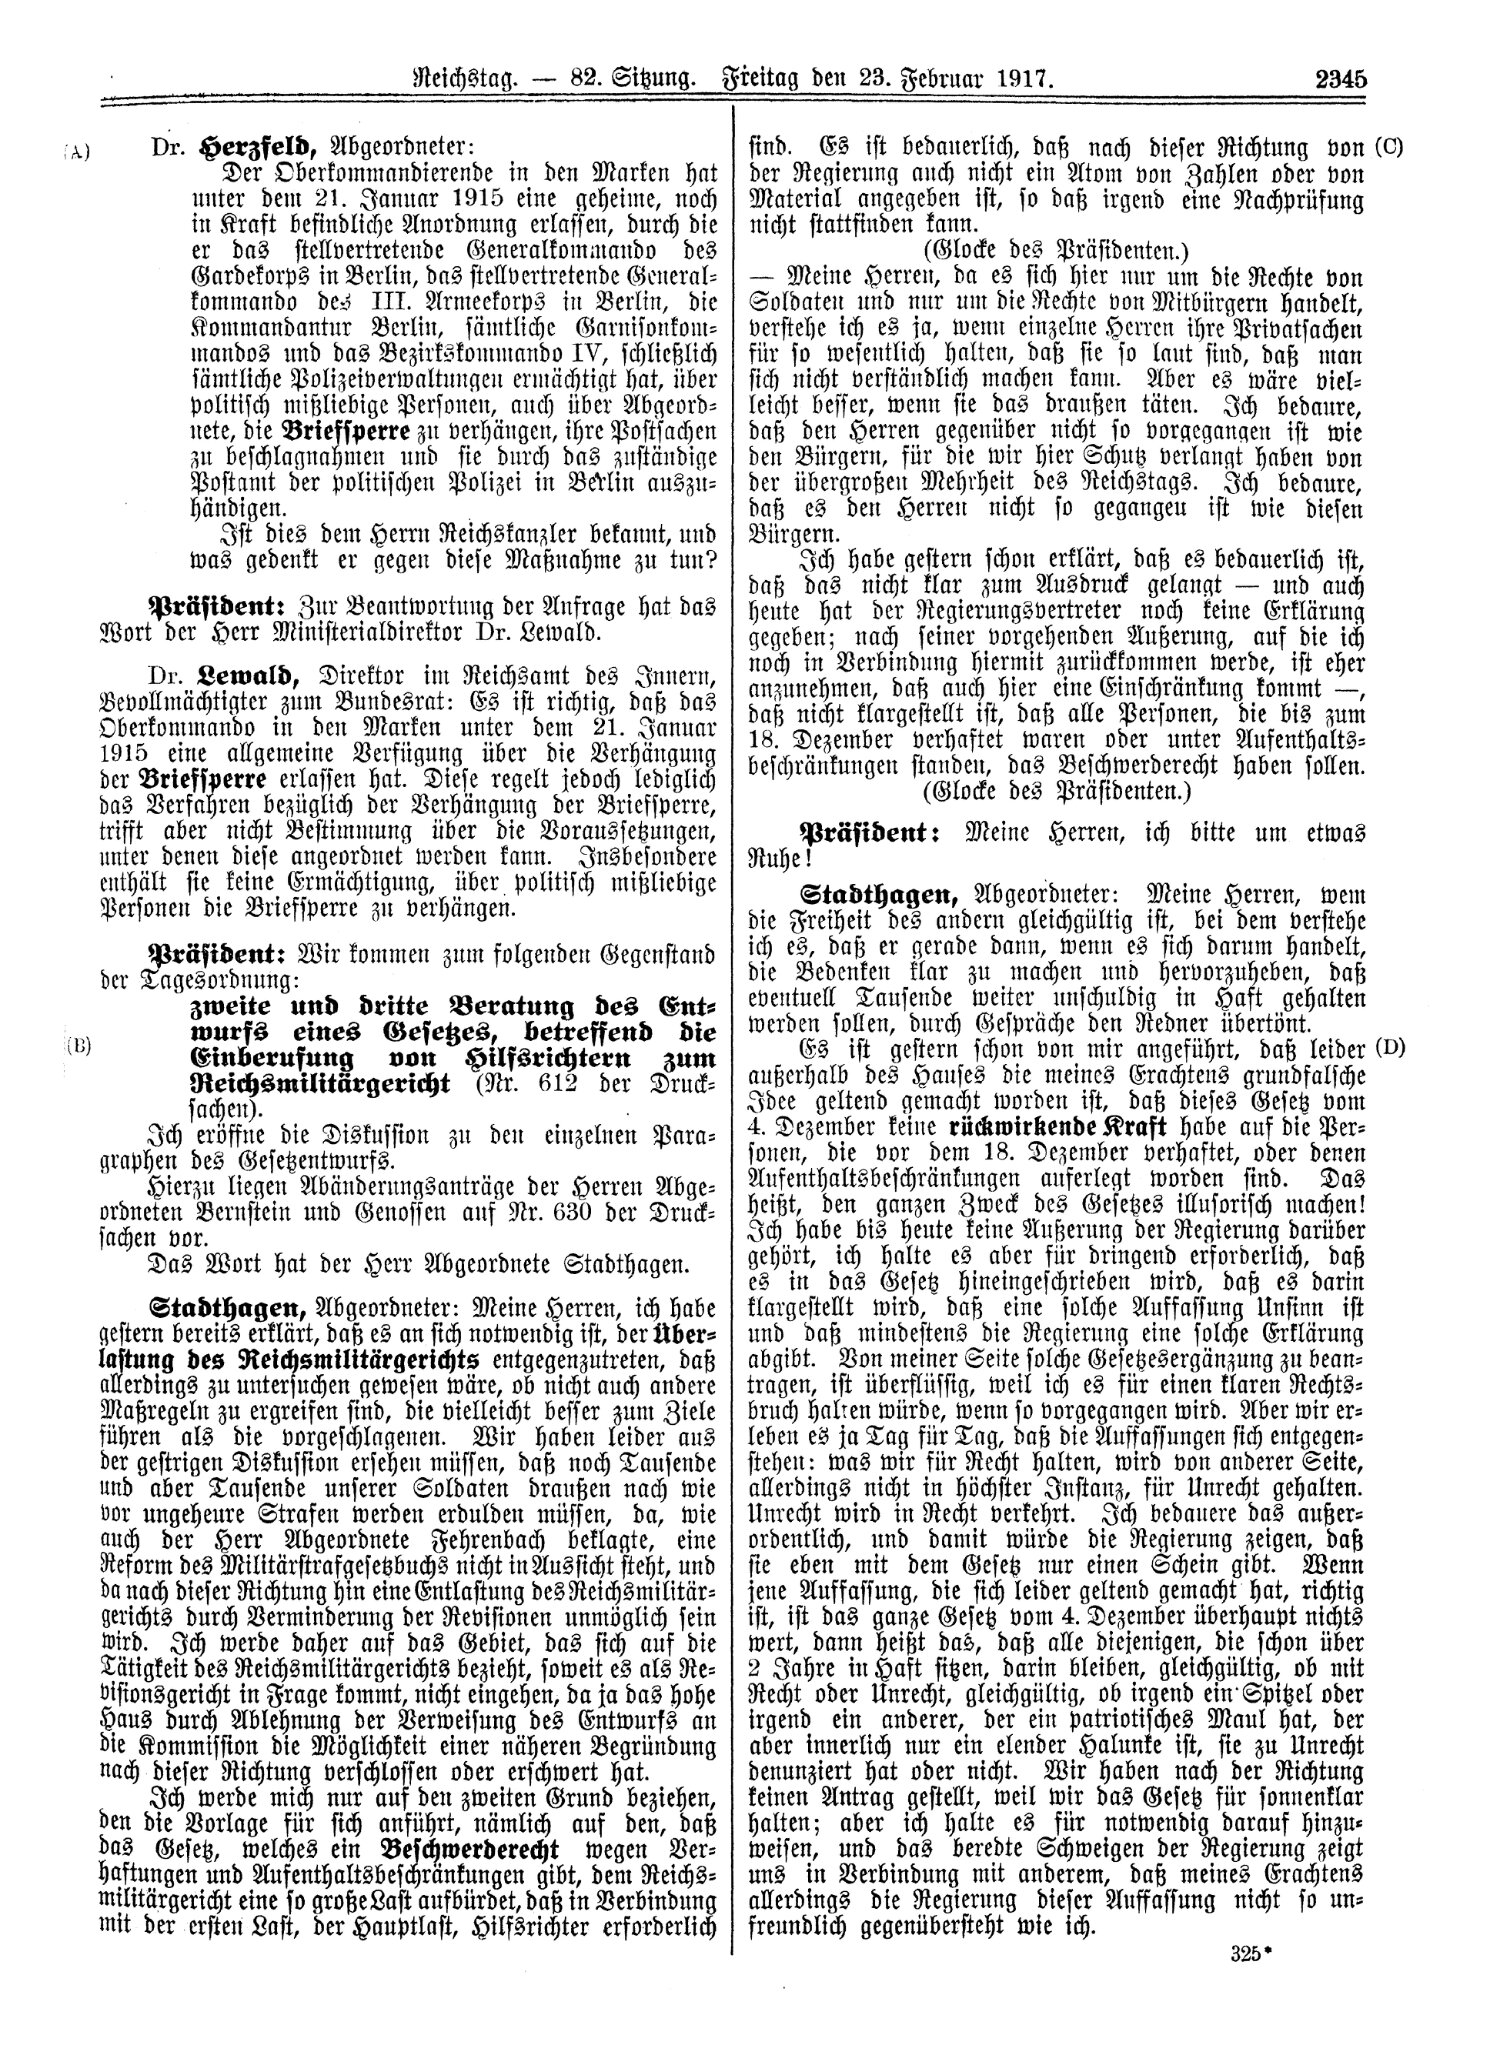 Scan of page 2345